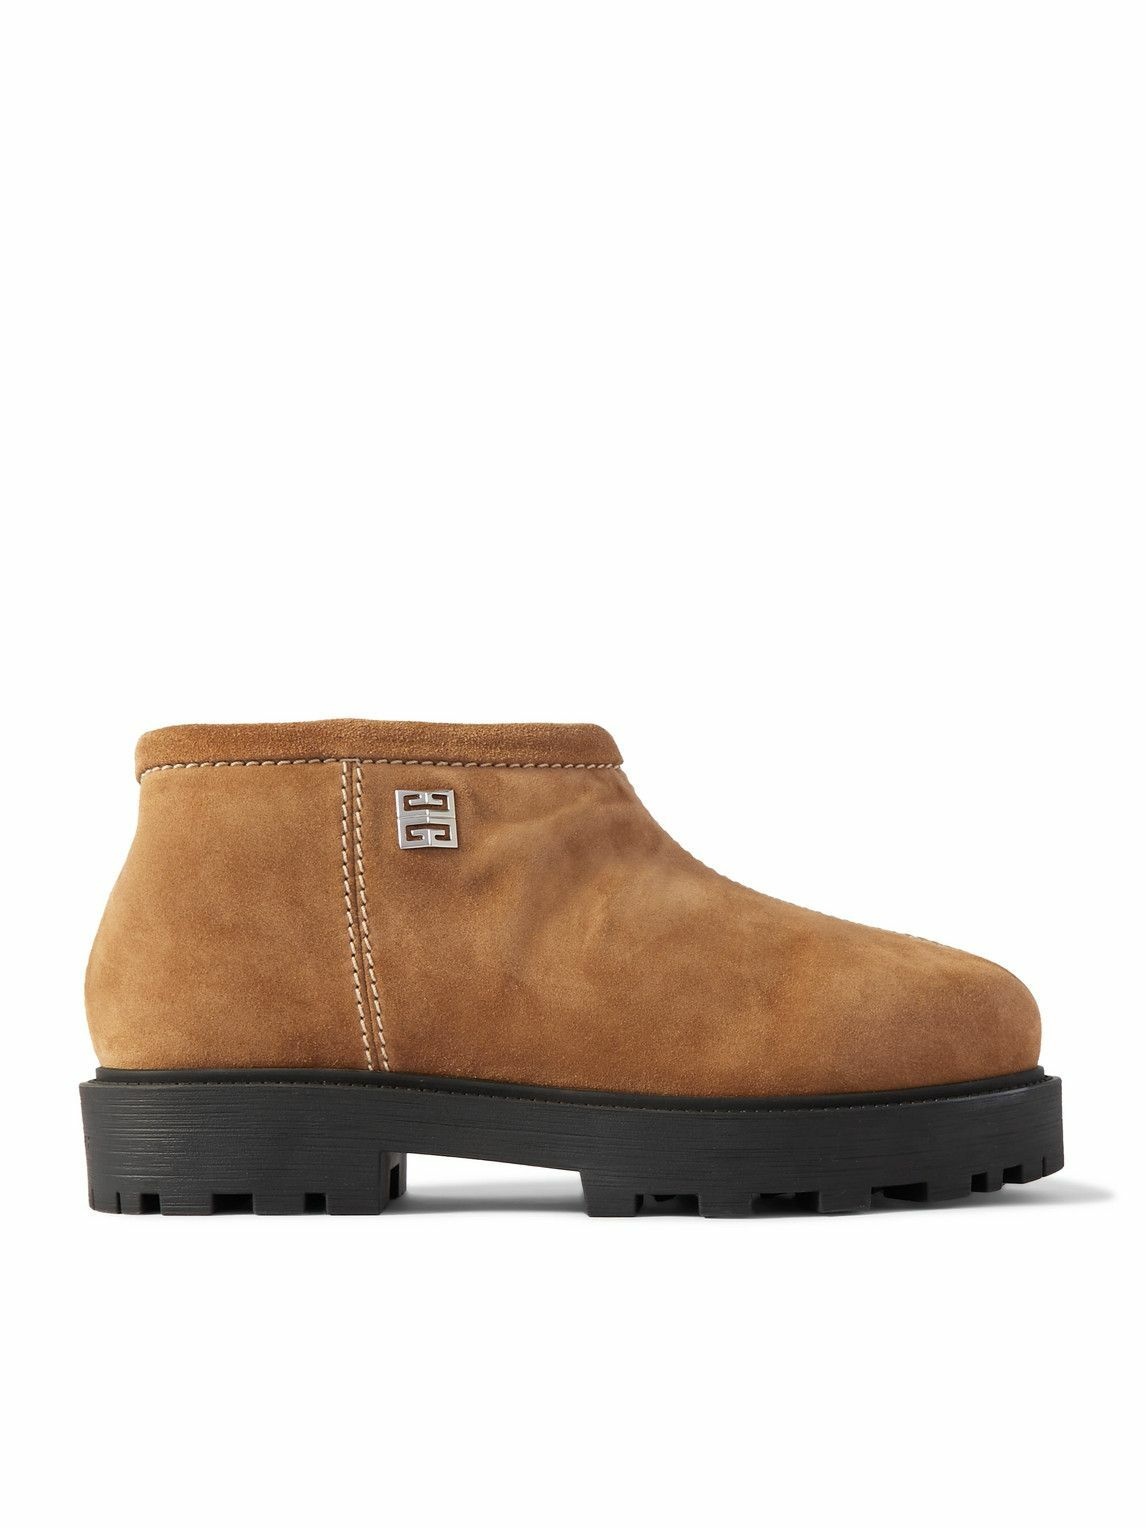 Photo: Givenchy - Shearling-Lined Logo-Embellished Suede Boots - Neutrals